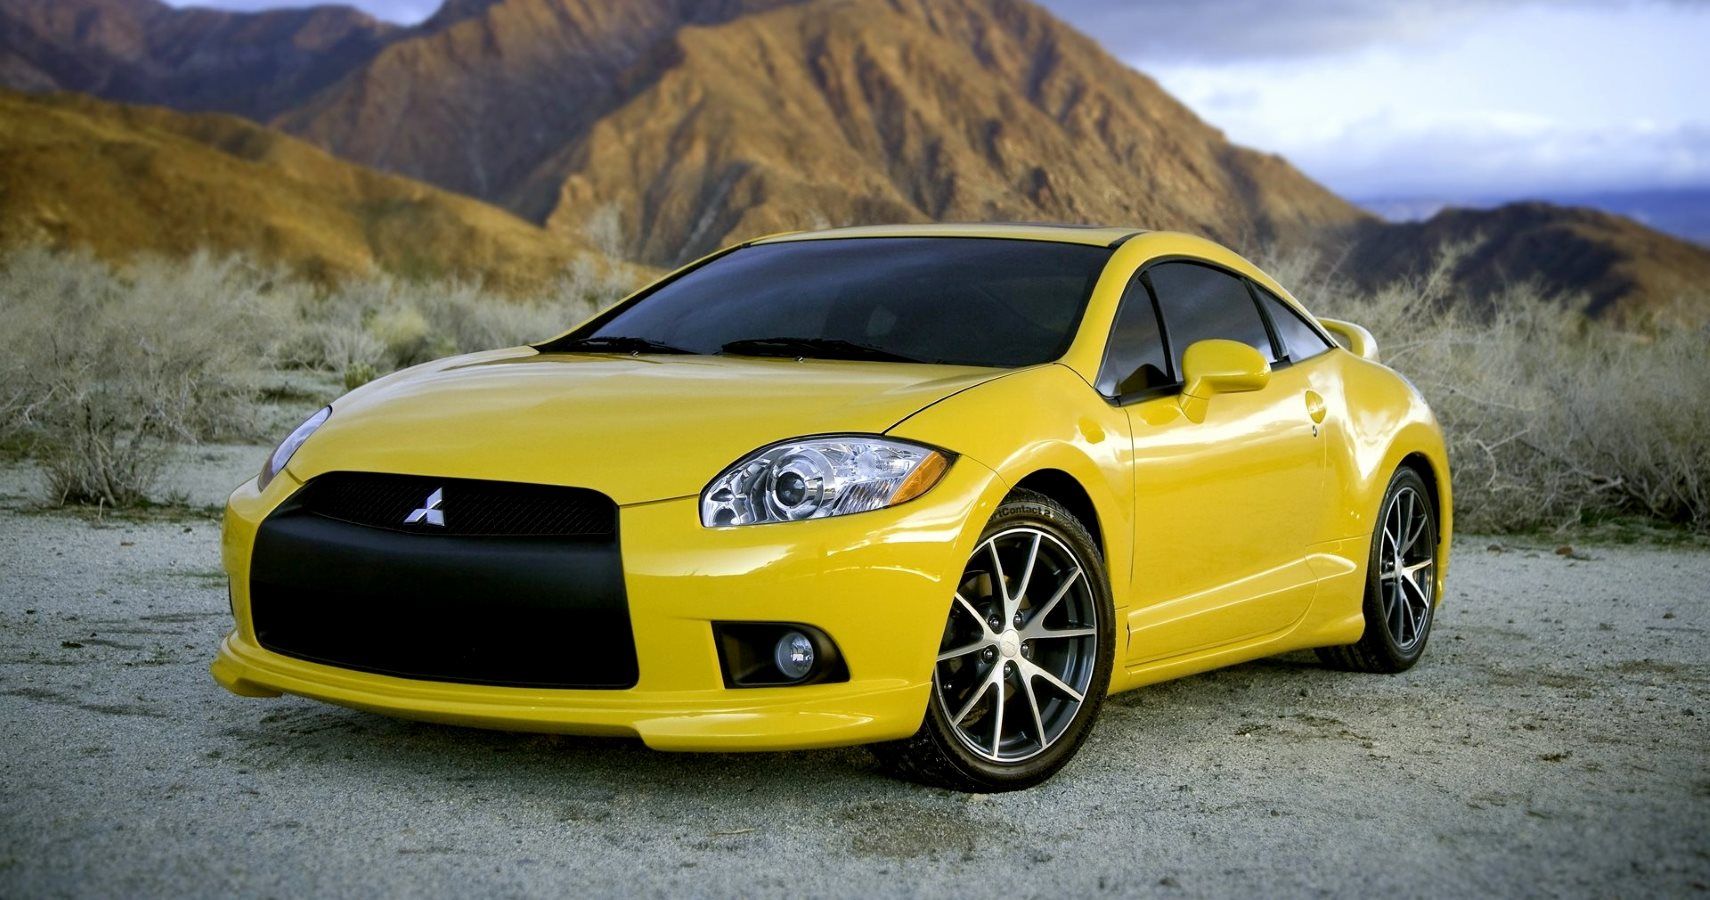 Report: Yellow Cars Hold Their Value Better Than Others